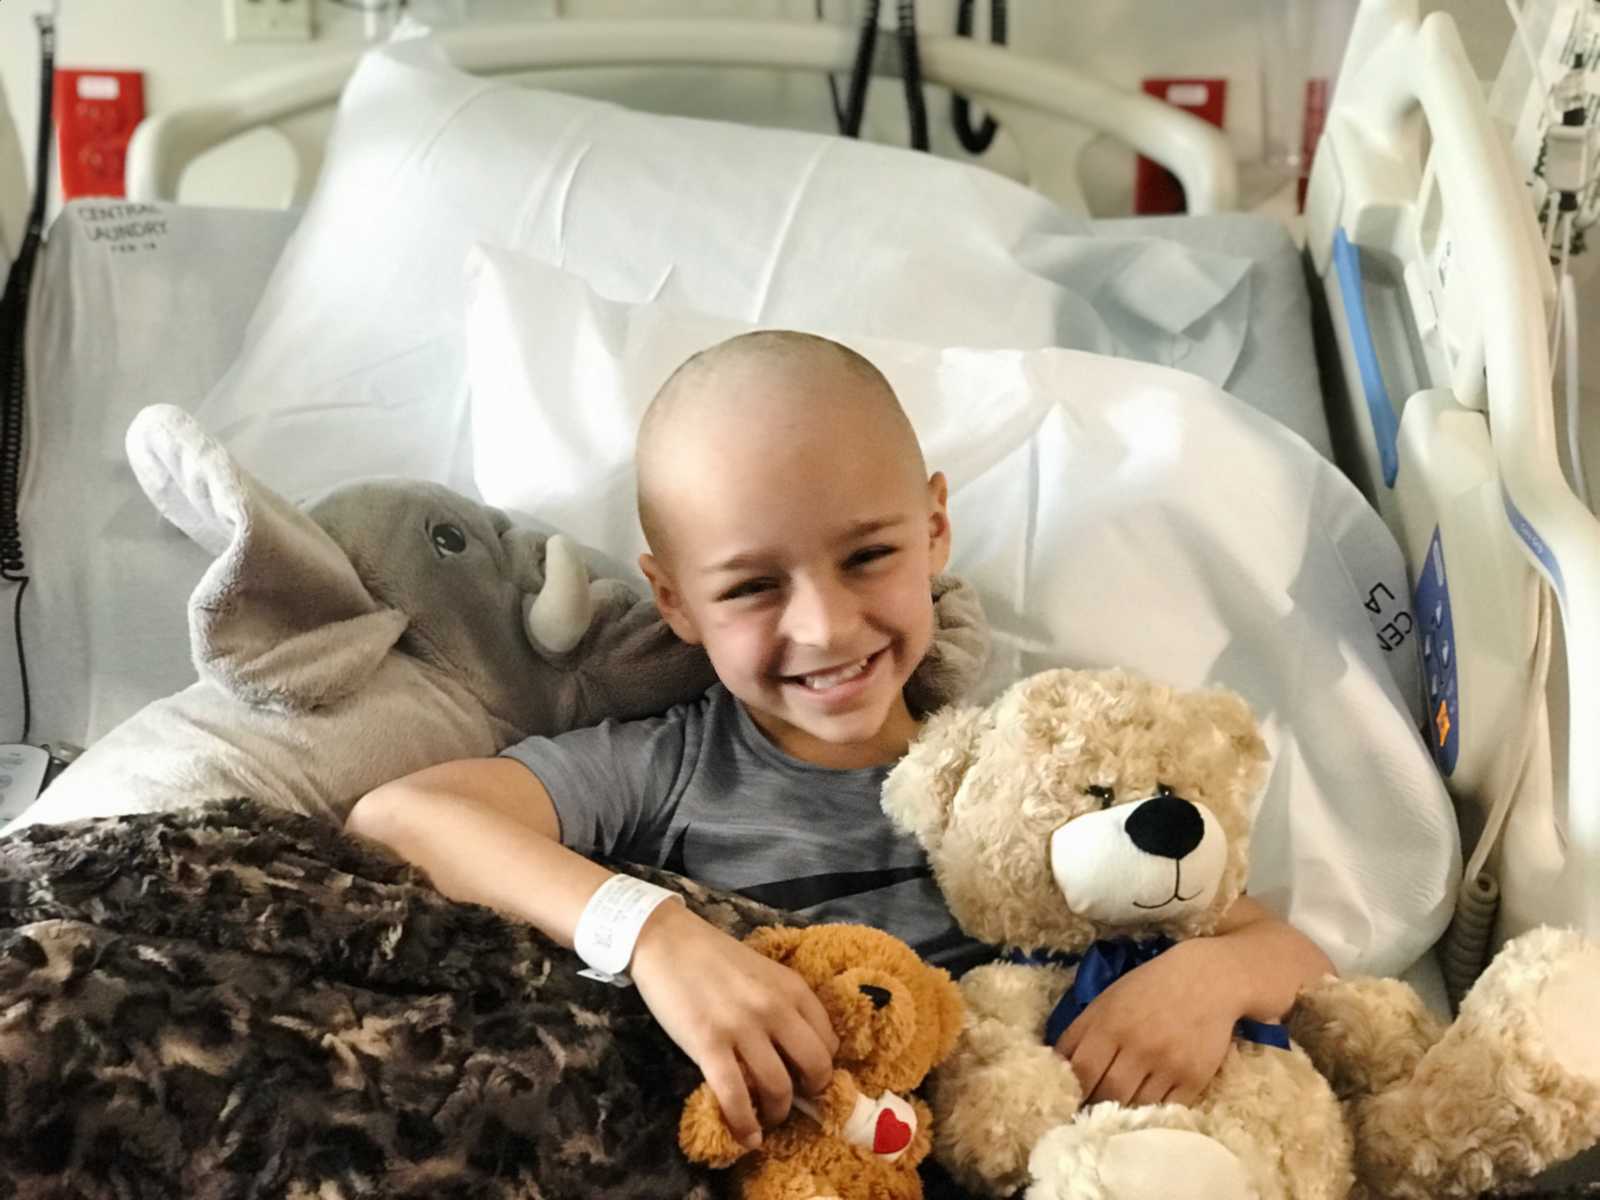 Boy who had leg tumors smiling in hospital bed with stuffed animals in his lap